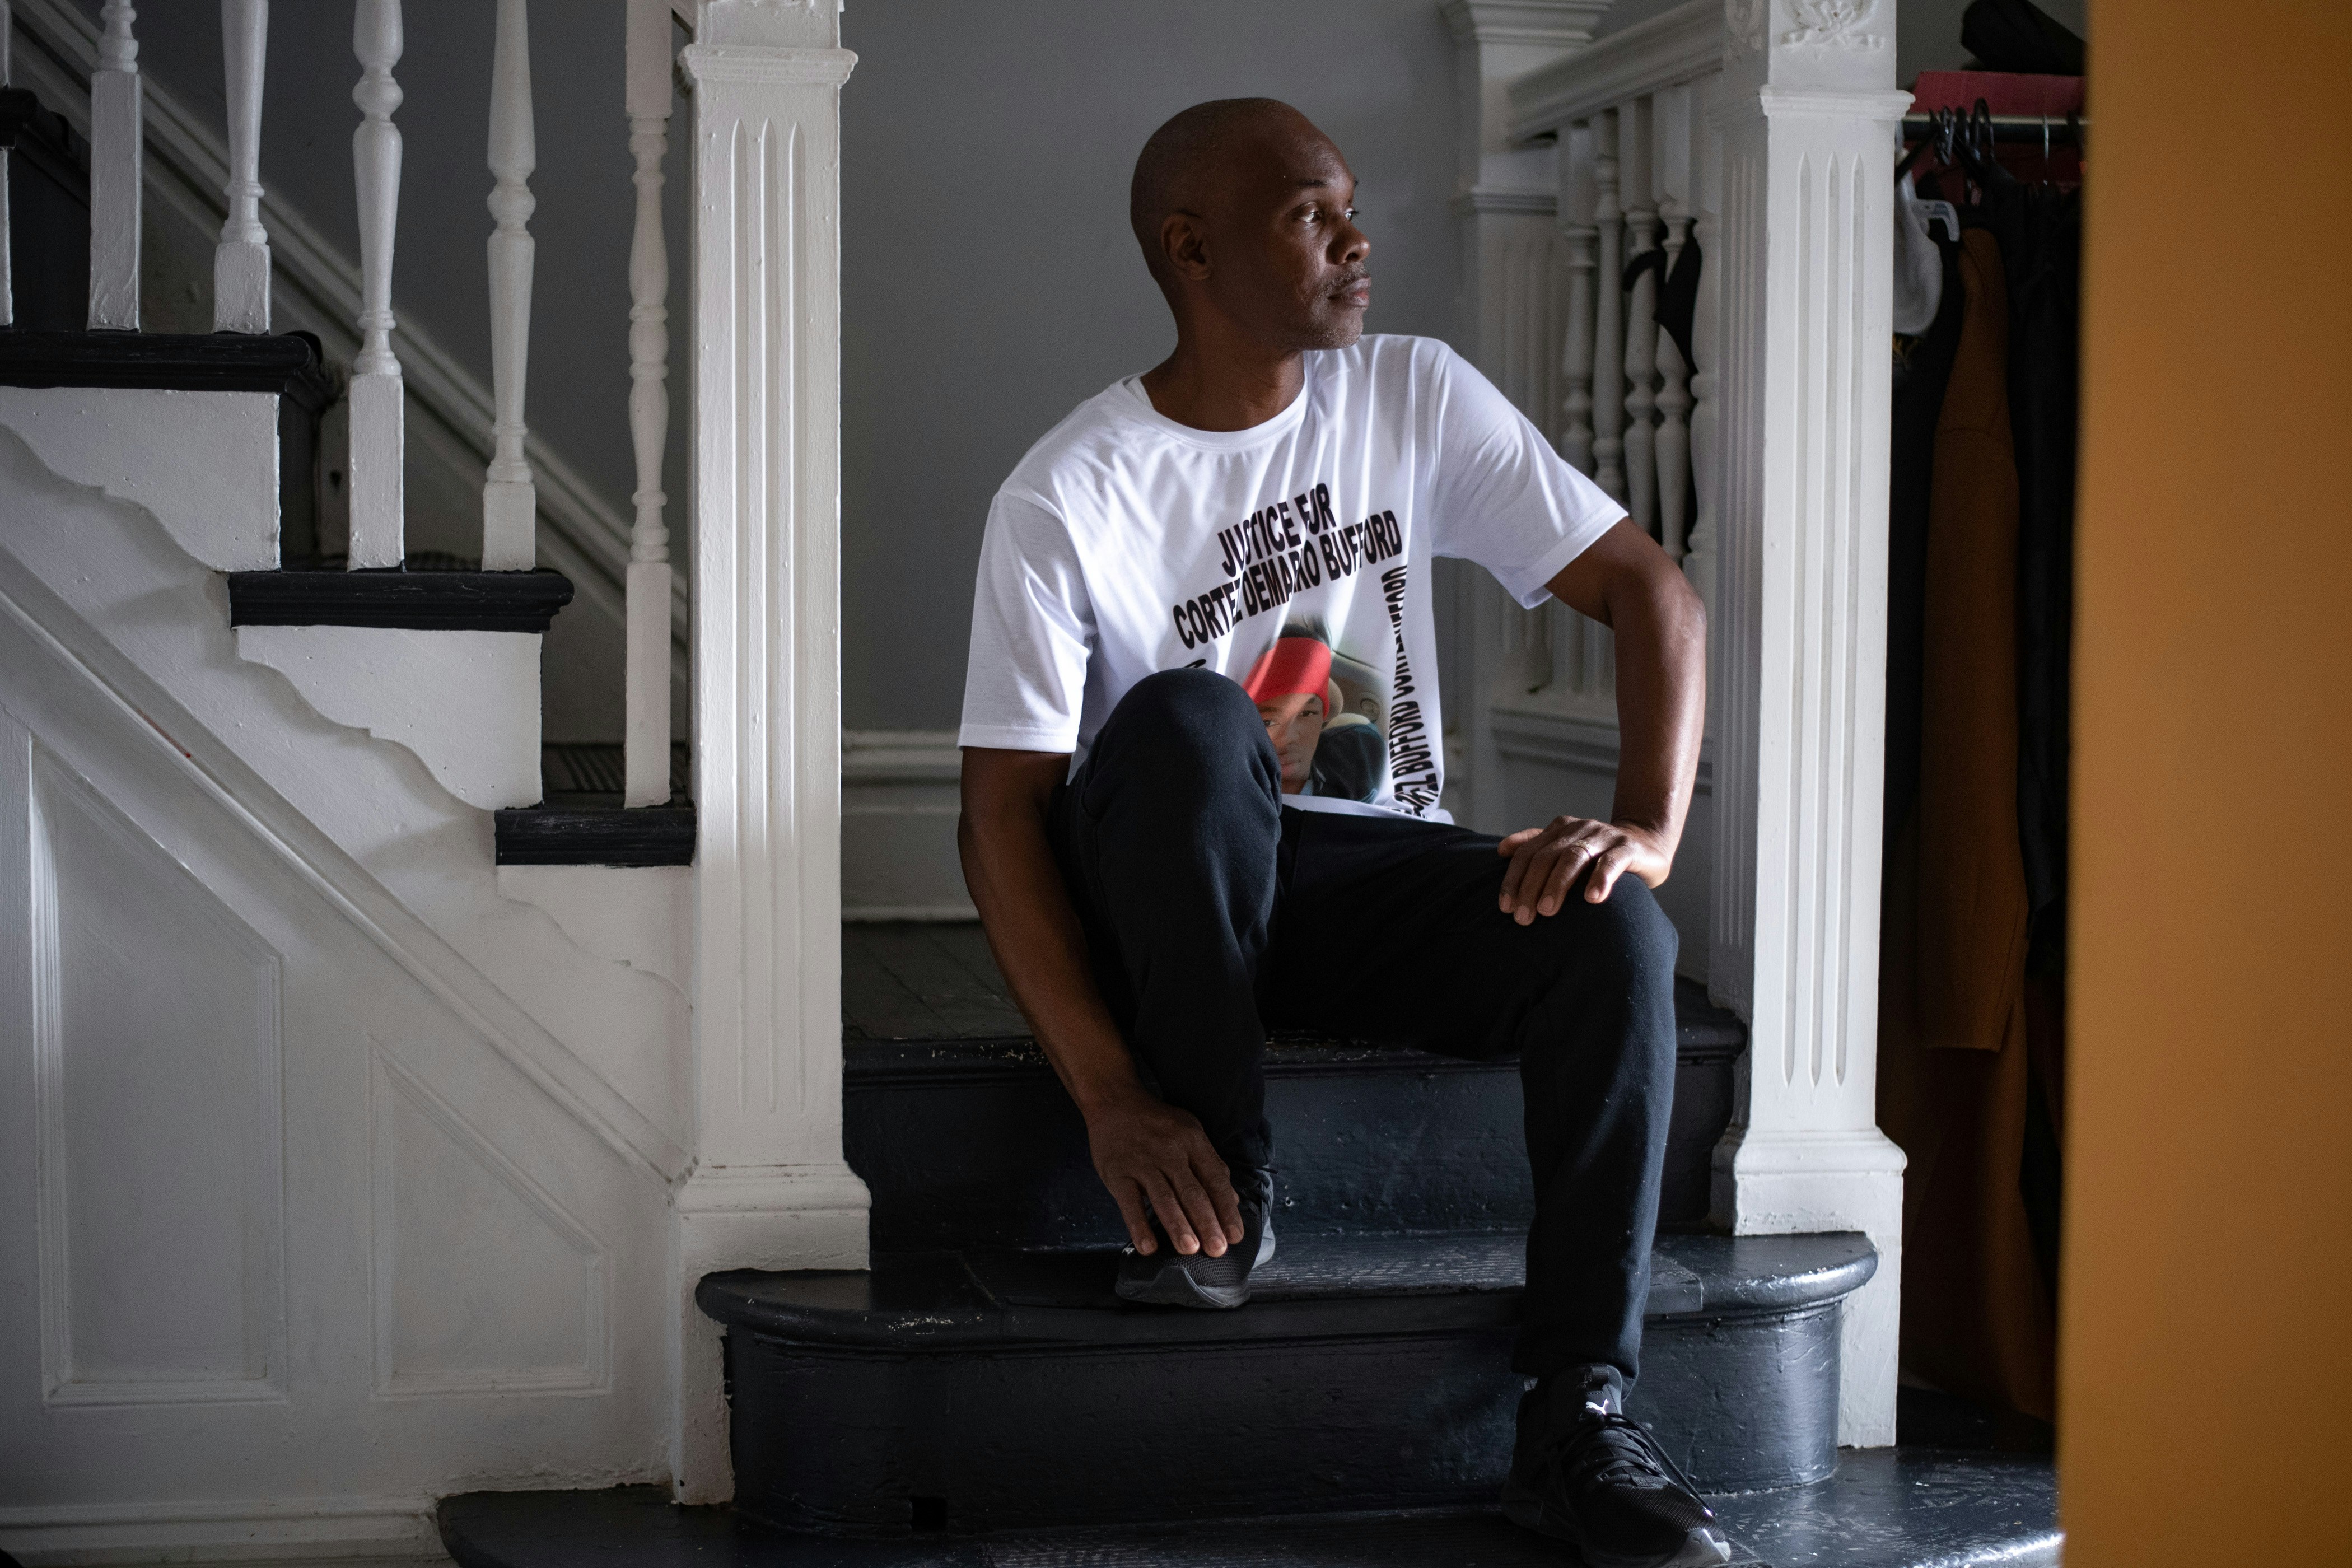 Antoine Bufford, father of Cortez Bufford poses for a portrait at his home on May 16, 2021 in St. Louis, Missouri. Photo by Michael B. Thomas for The Intercept